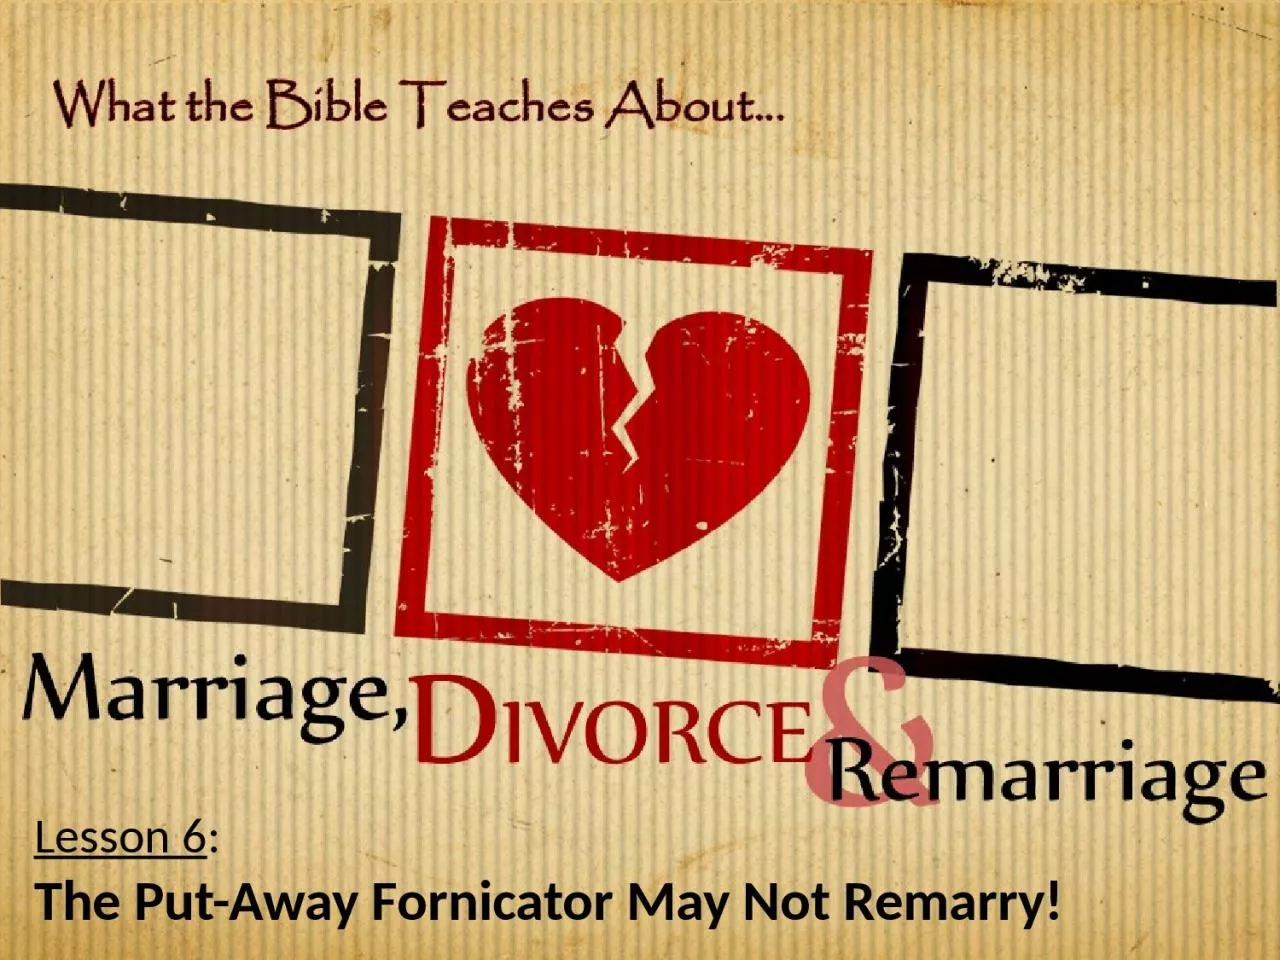 Lesson 6 : The Put-Away Fornicator May Not Remarry!